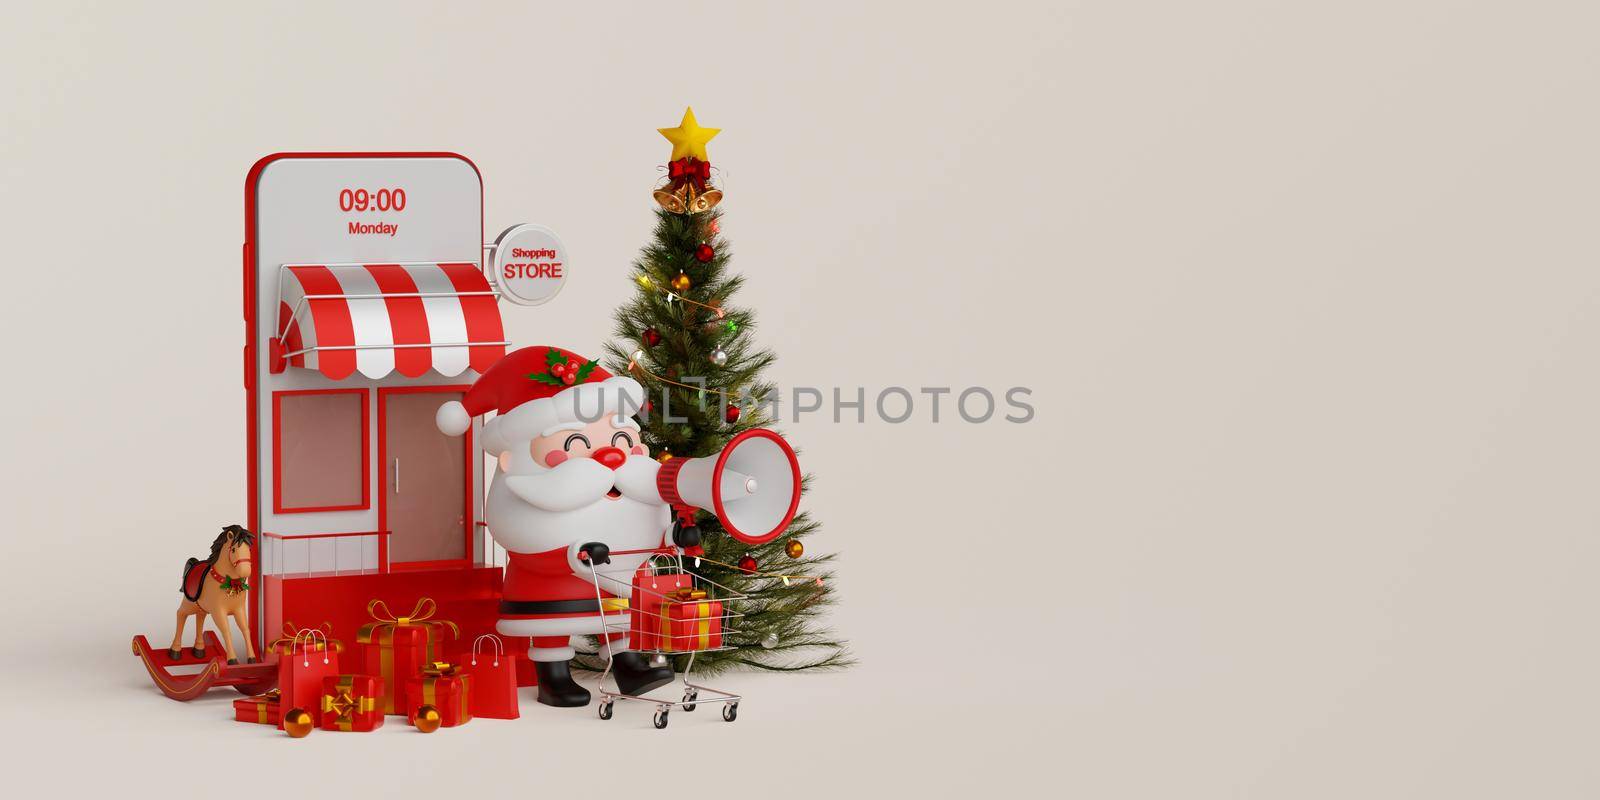 Christmas shopping online on mobile concept, Santa Claus pushing a shopping cart with gift box in front of mobile shop, 3d illustration by nutzchotwarut